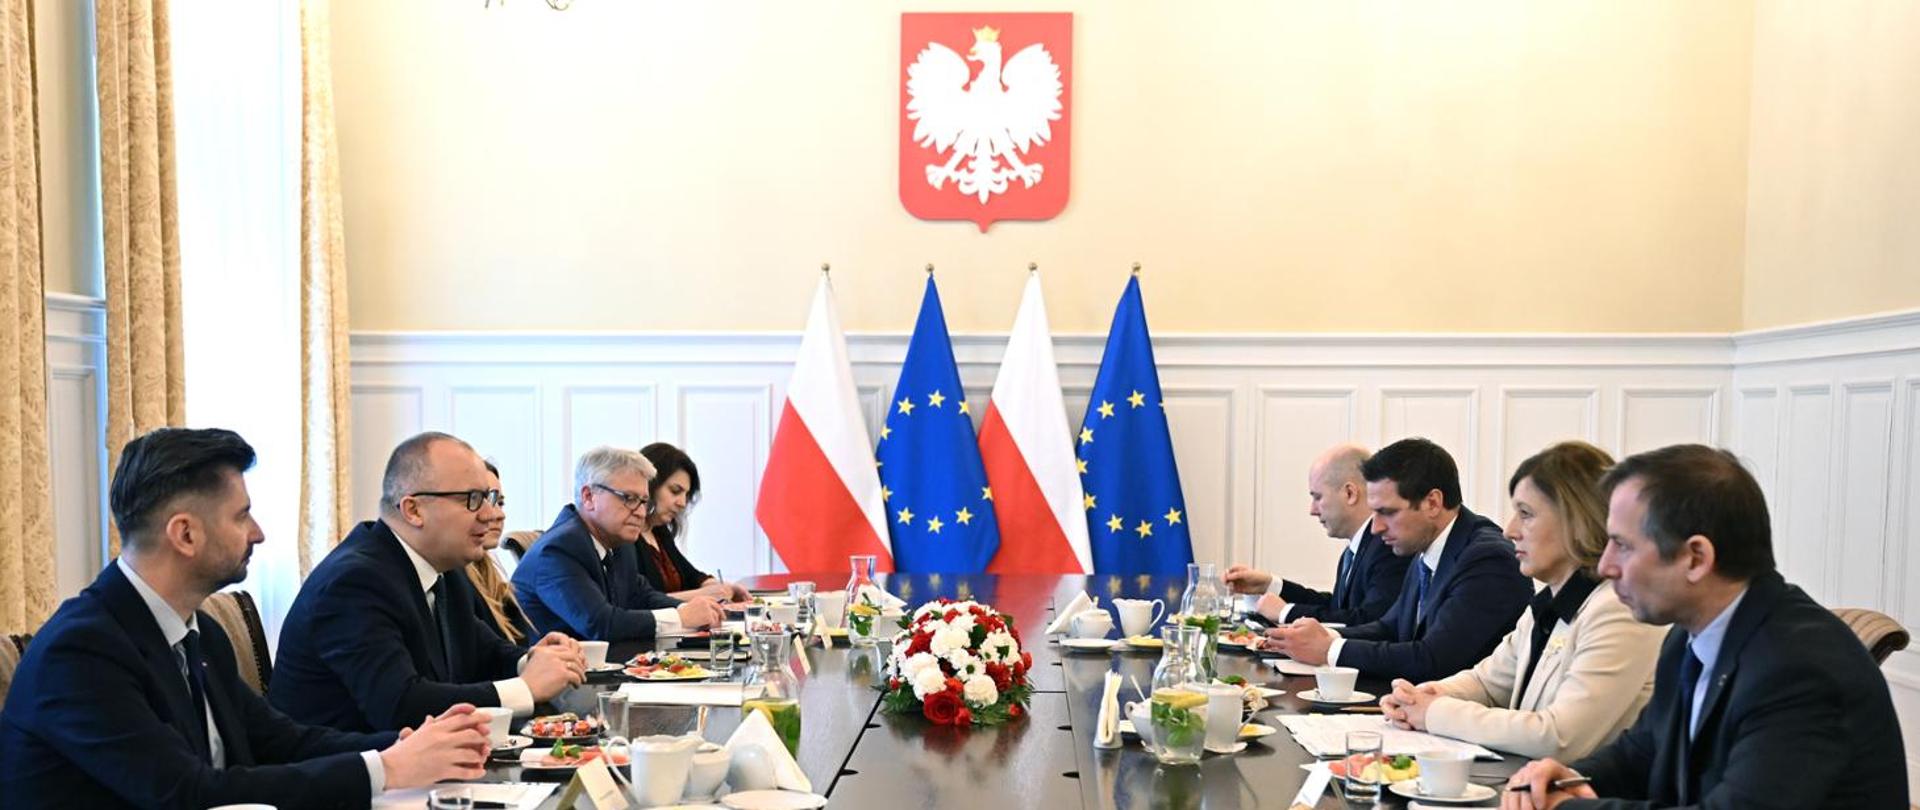 Representatives of the management of the Ministry of Justice met with the Vice-President of the European Commission, Věra Jourová